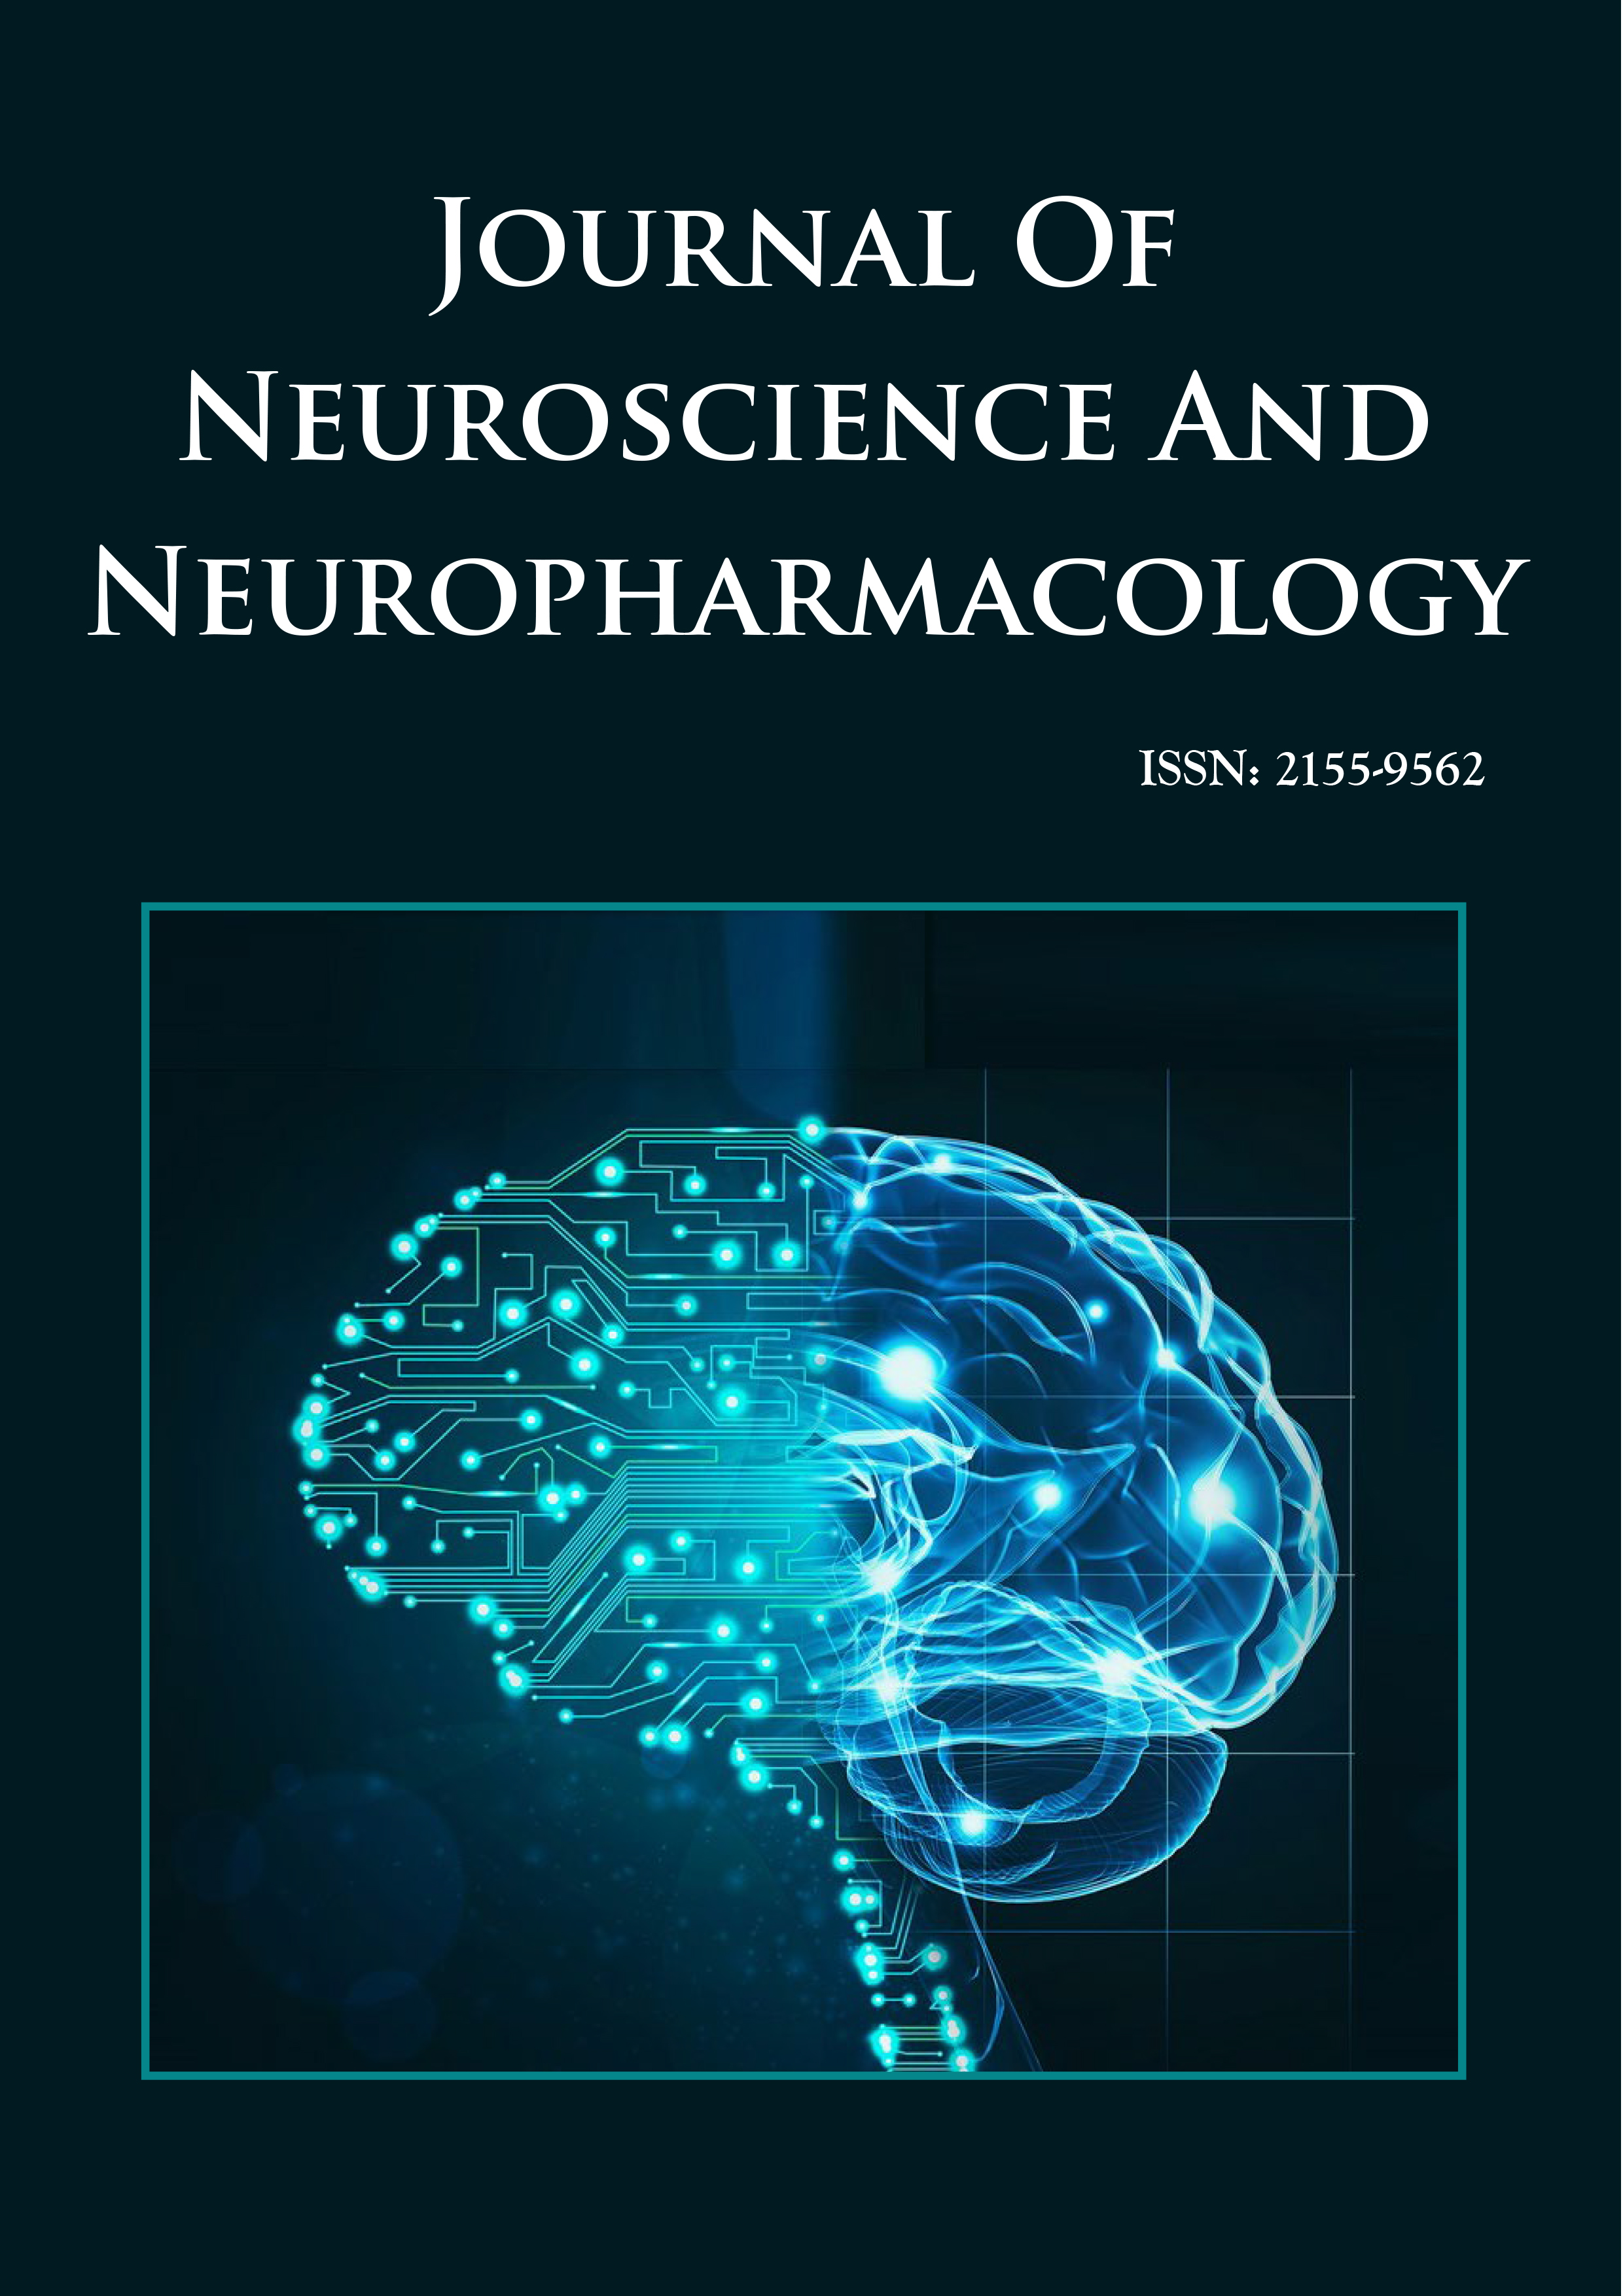 Journal of Neuroscience and Neuropharmacology- Open Access Journals